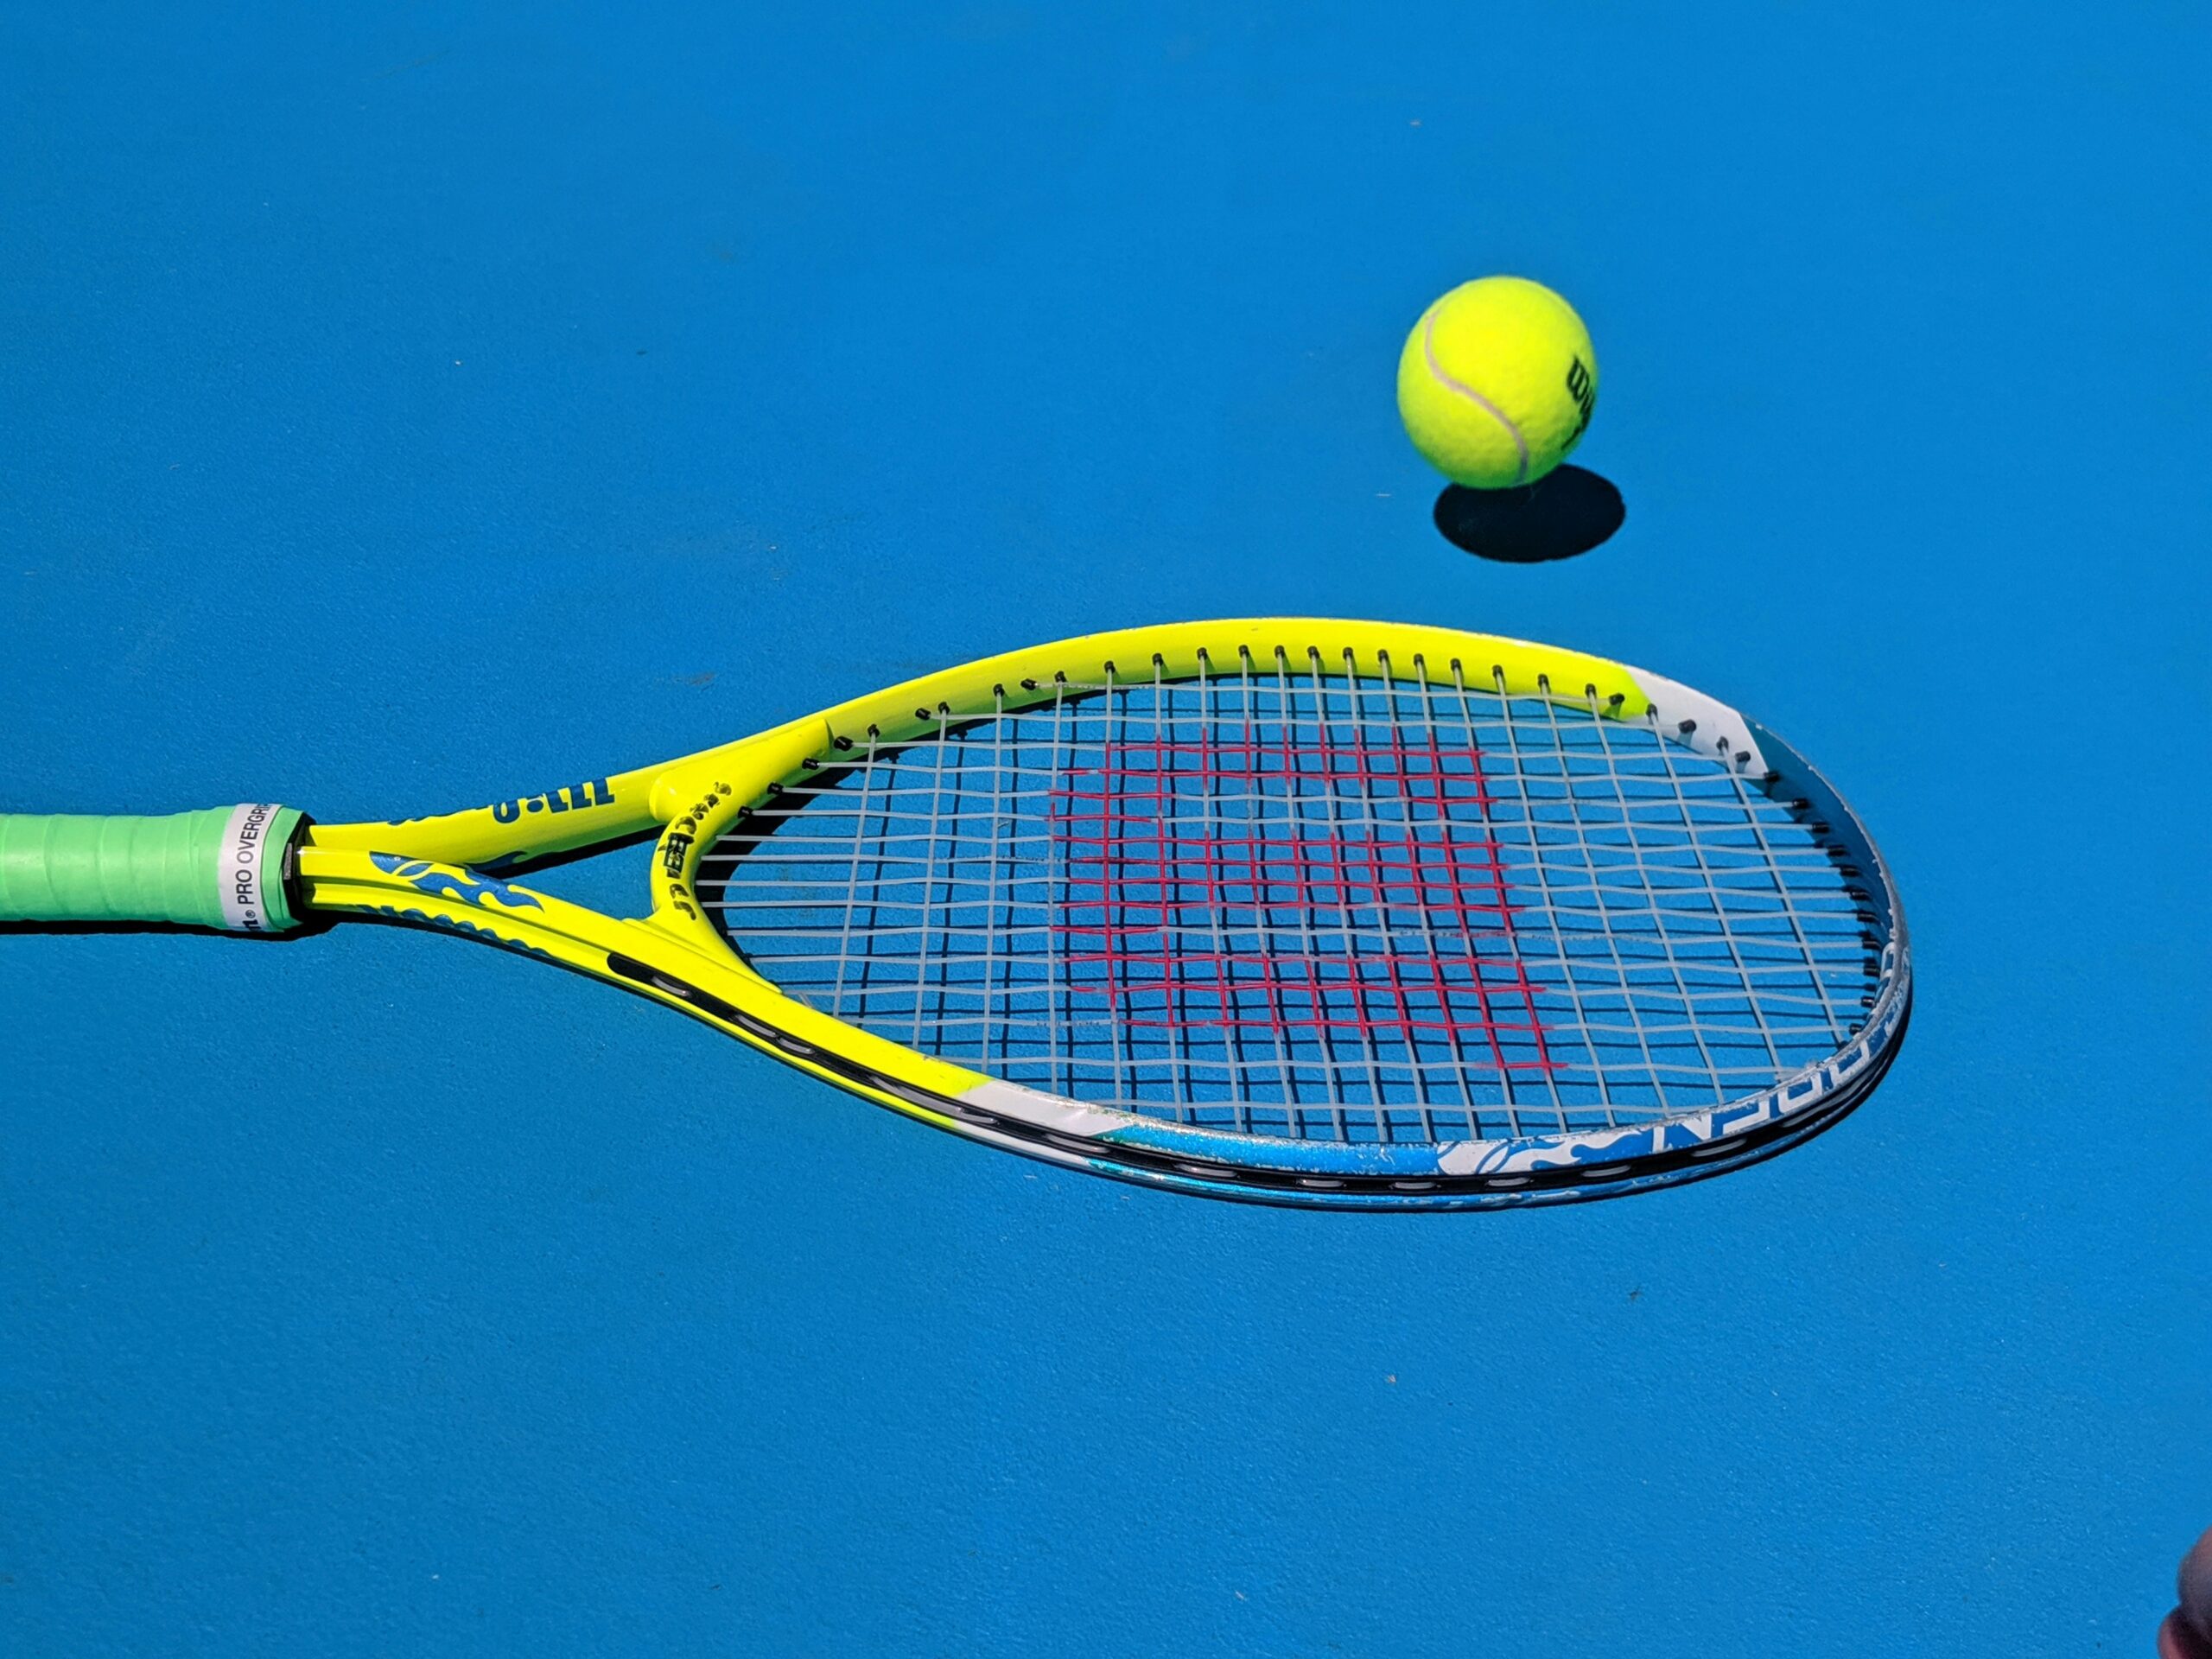 discover the latest updates, news, and insights on tennis, from professional tournaments to tips for beginners, all in one place.